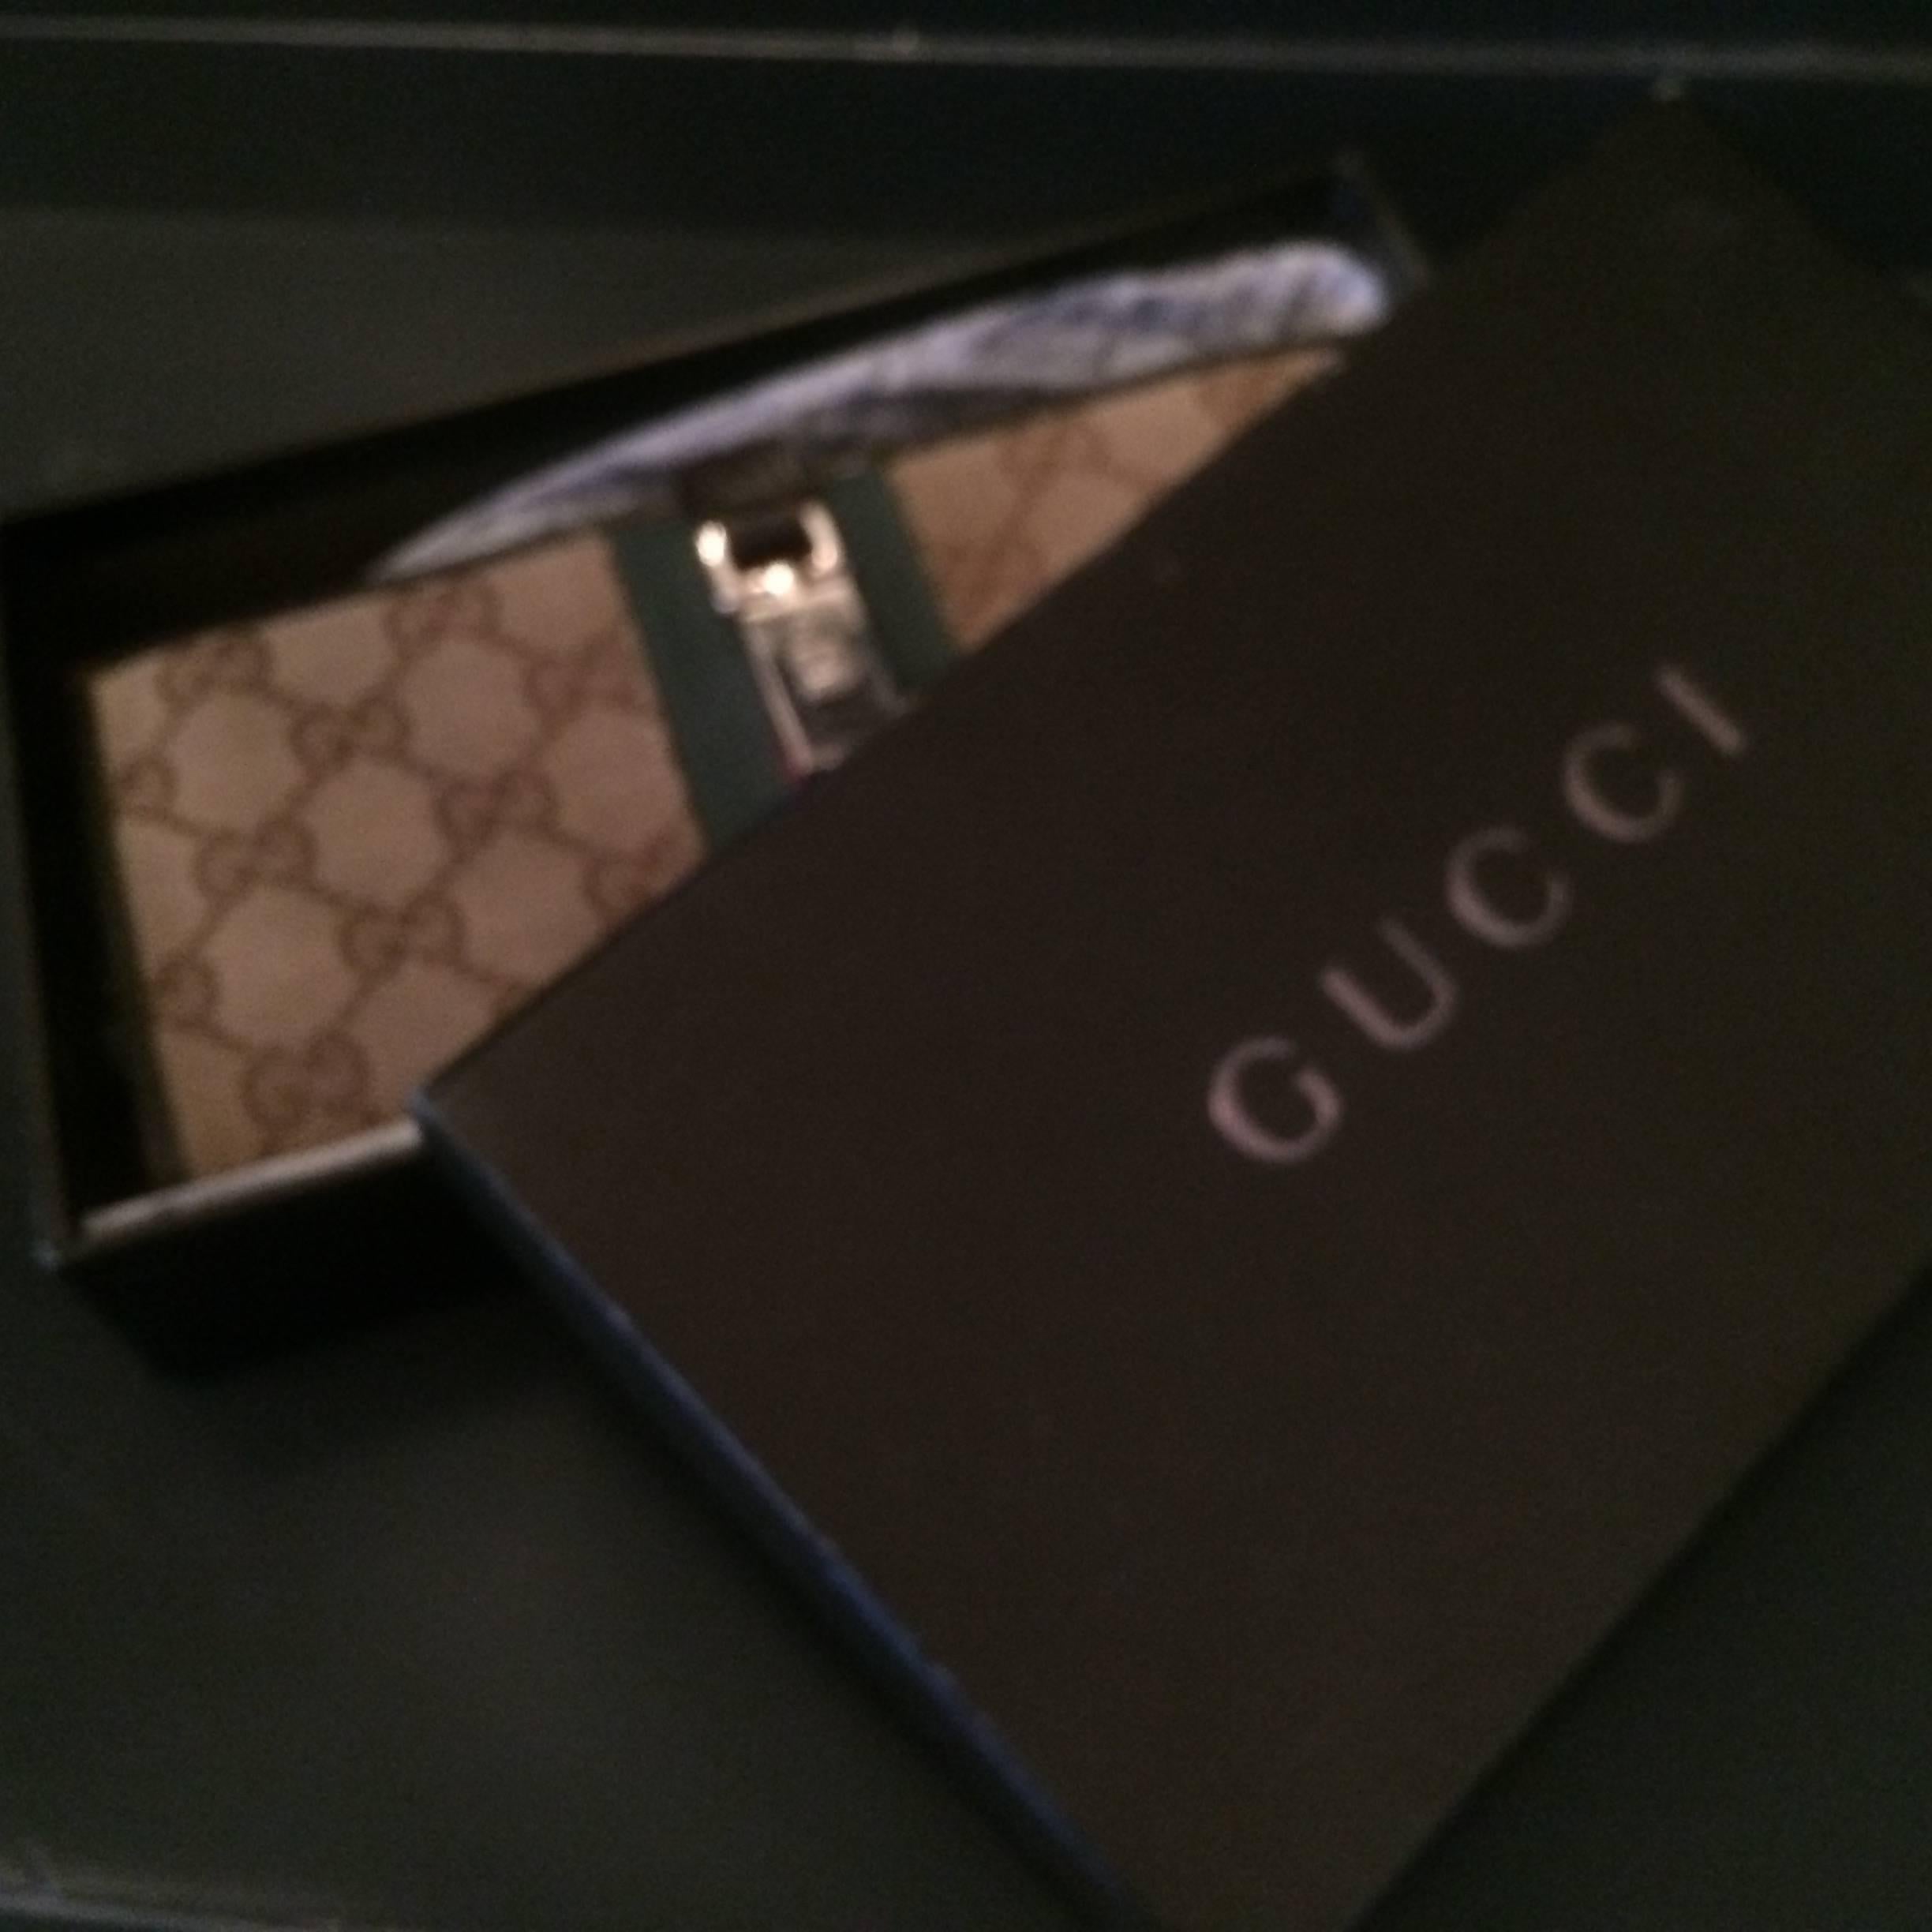 Beautiful new Gucci expanding wallet 
- Easy-Open Silver Gucci buckle / clasp
-7 Credit Card 
-Two separate compartments
-Italian Made